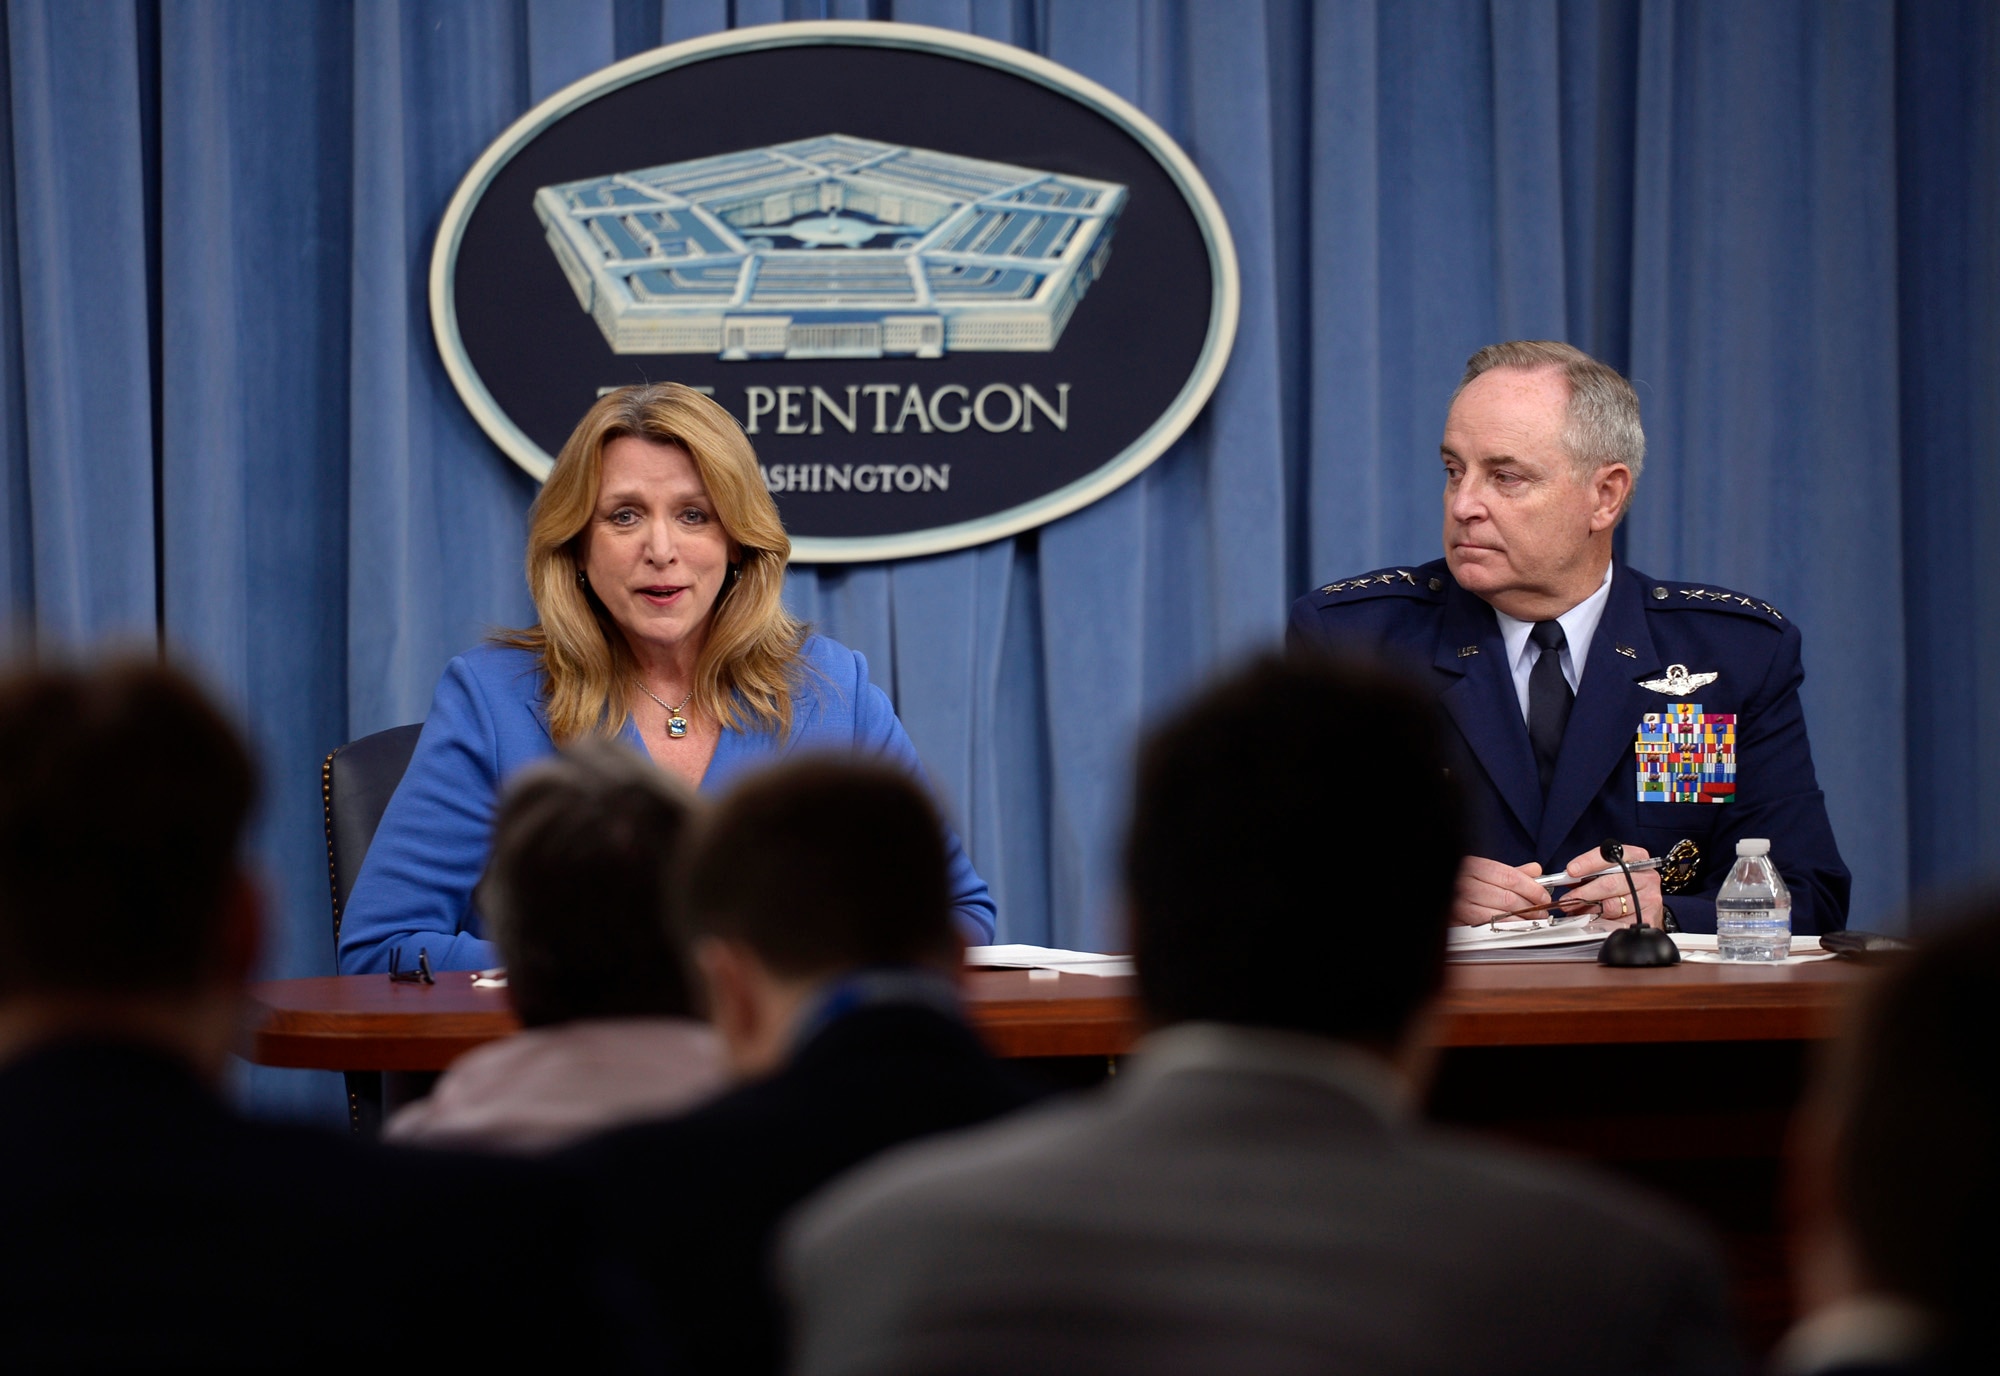 Secretary of the Air Force Deborah Lee James and Air Force Chief of Staff Gen. Mark A. Welsh III give a press conference on the "State of the Air Force" in the Pentagon March 7, 2016. (U.S. Air Force photo/Scott M. Ash)